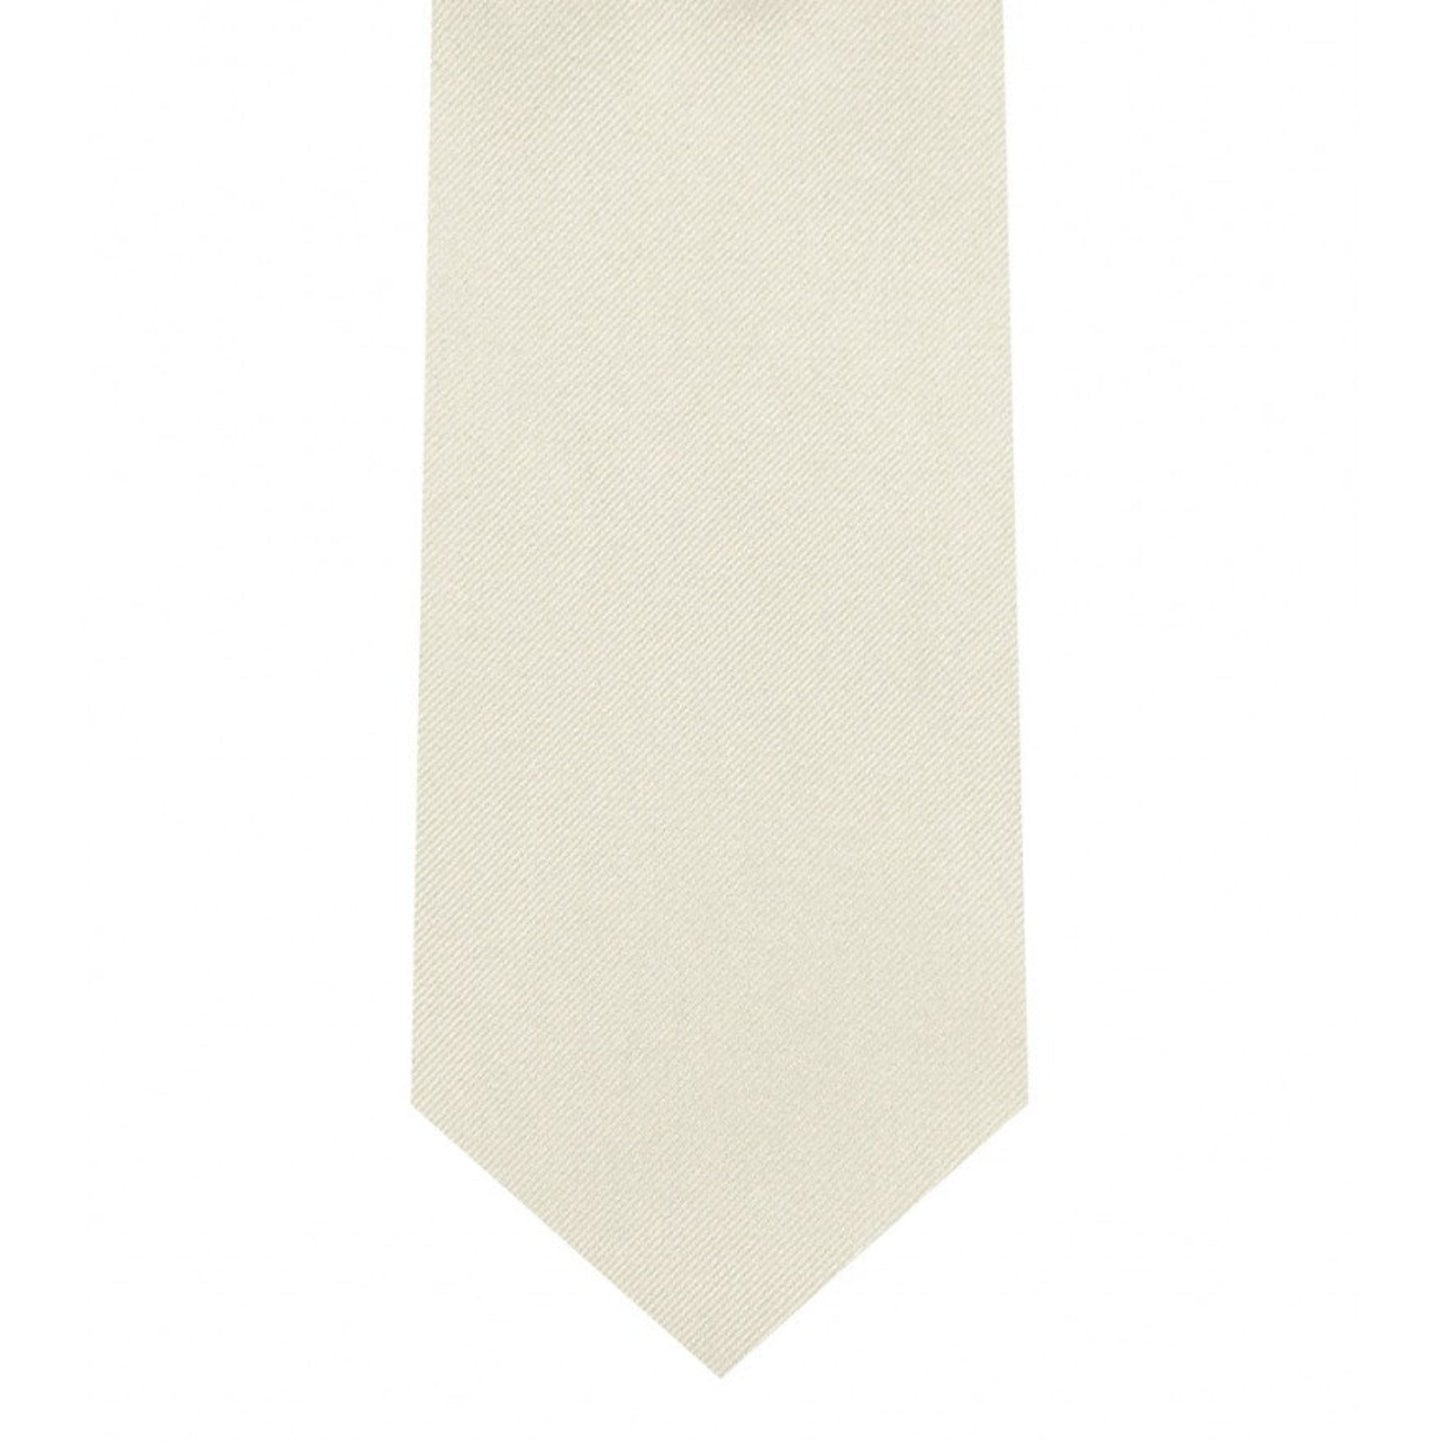 Classic Ivory Tie Skinny width 2.75 inches With Matching Pocket Square | KCT Menswear